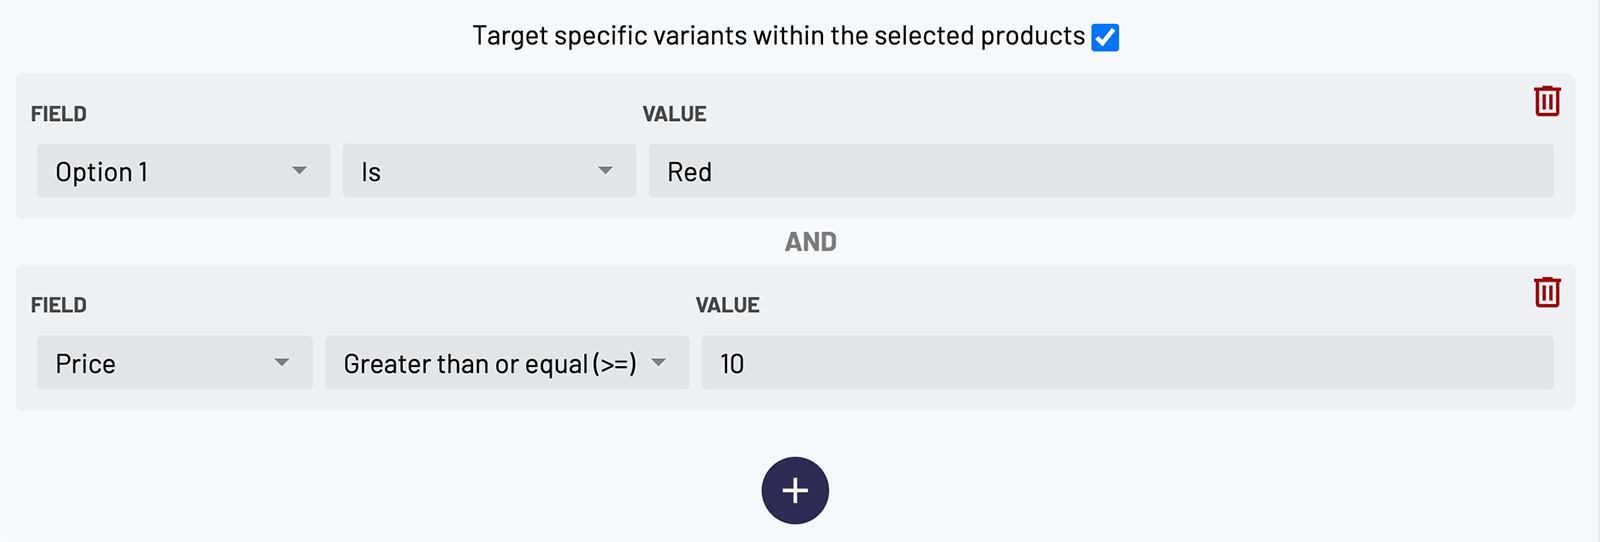 Specify which variants you want to target